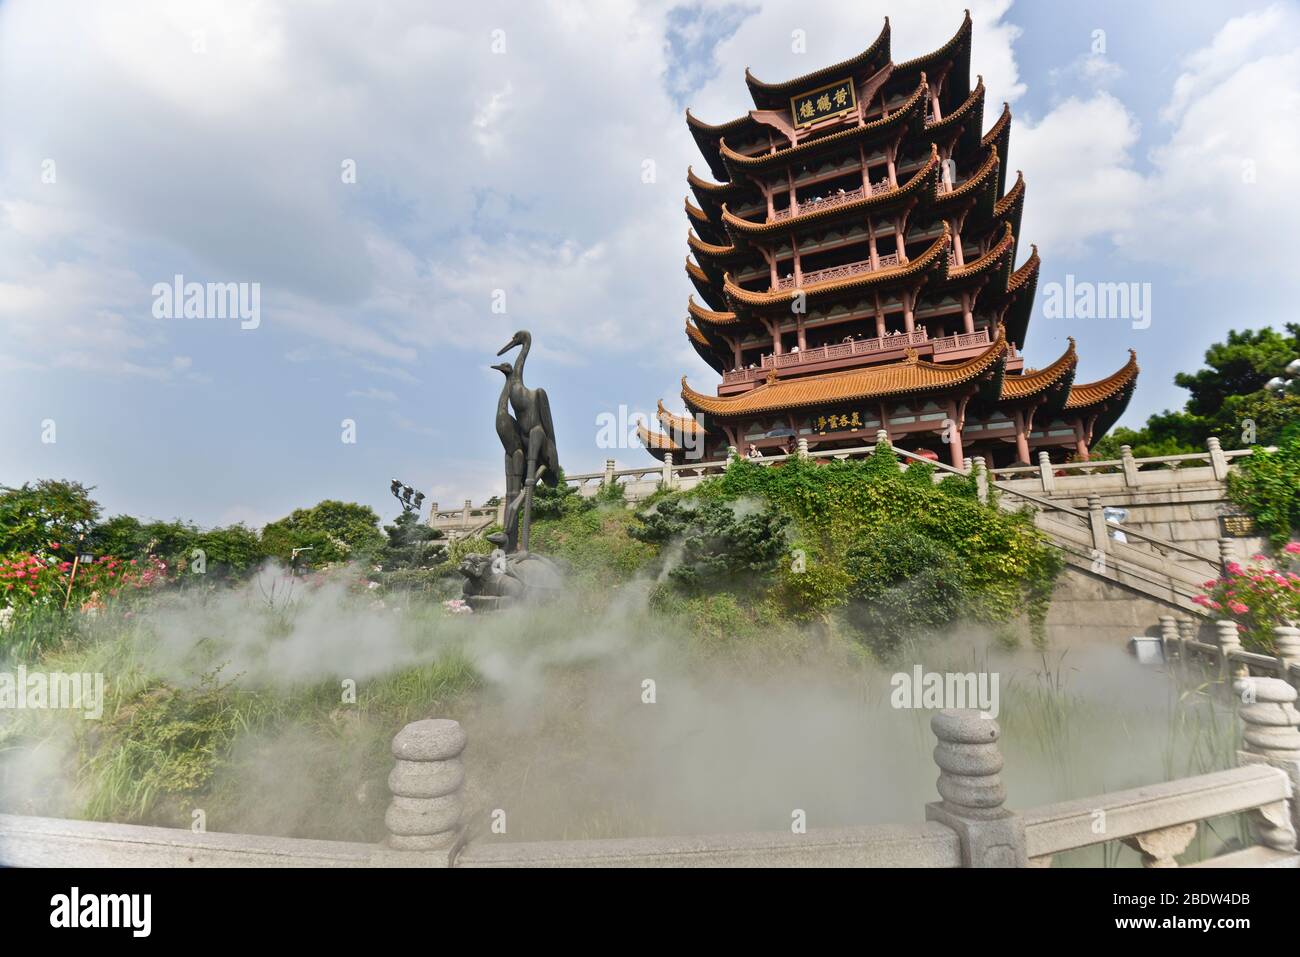 Yellow Crane Tower and Bronze Sculptures of Returning Cranes. Wuhan, China Stock Photo